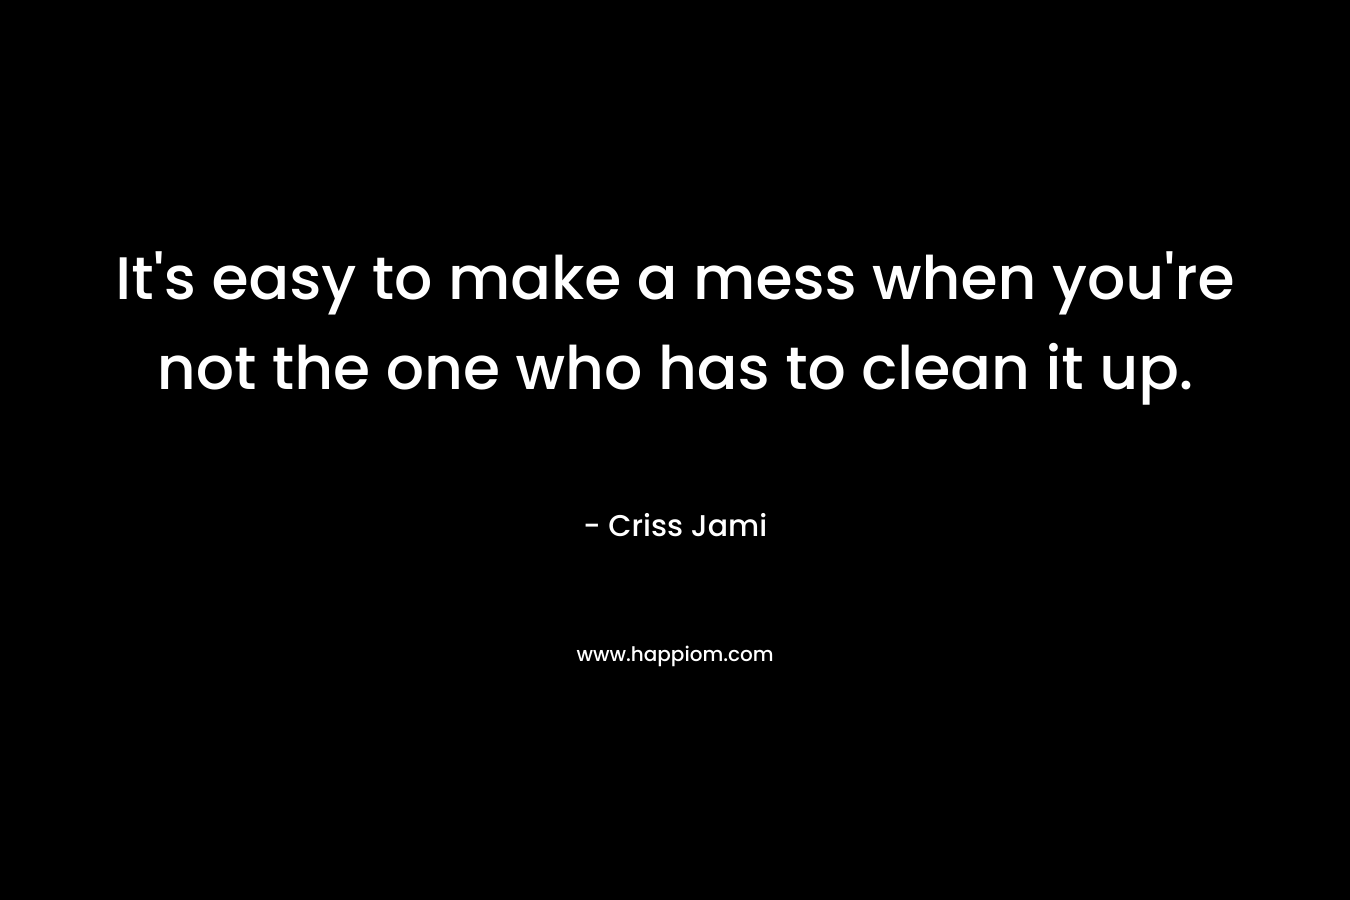 It's easy to make a mess when you're not the one who has to clean it up.